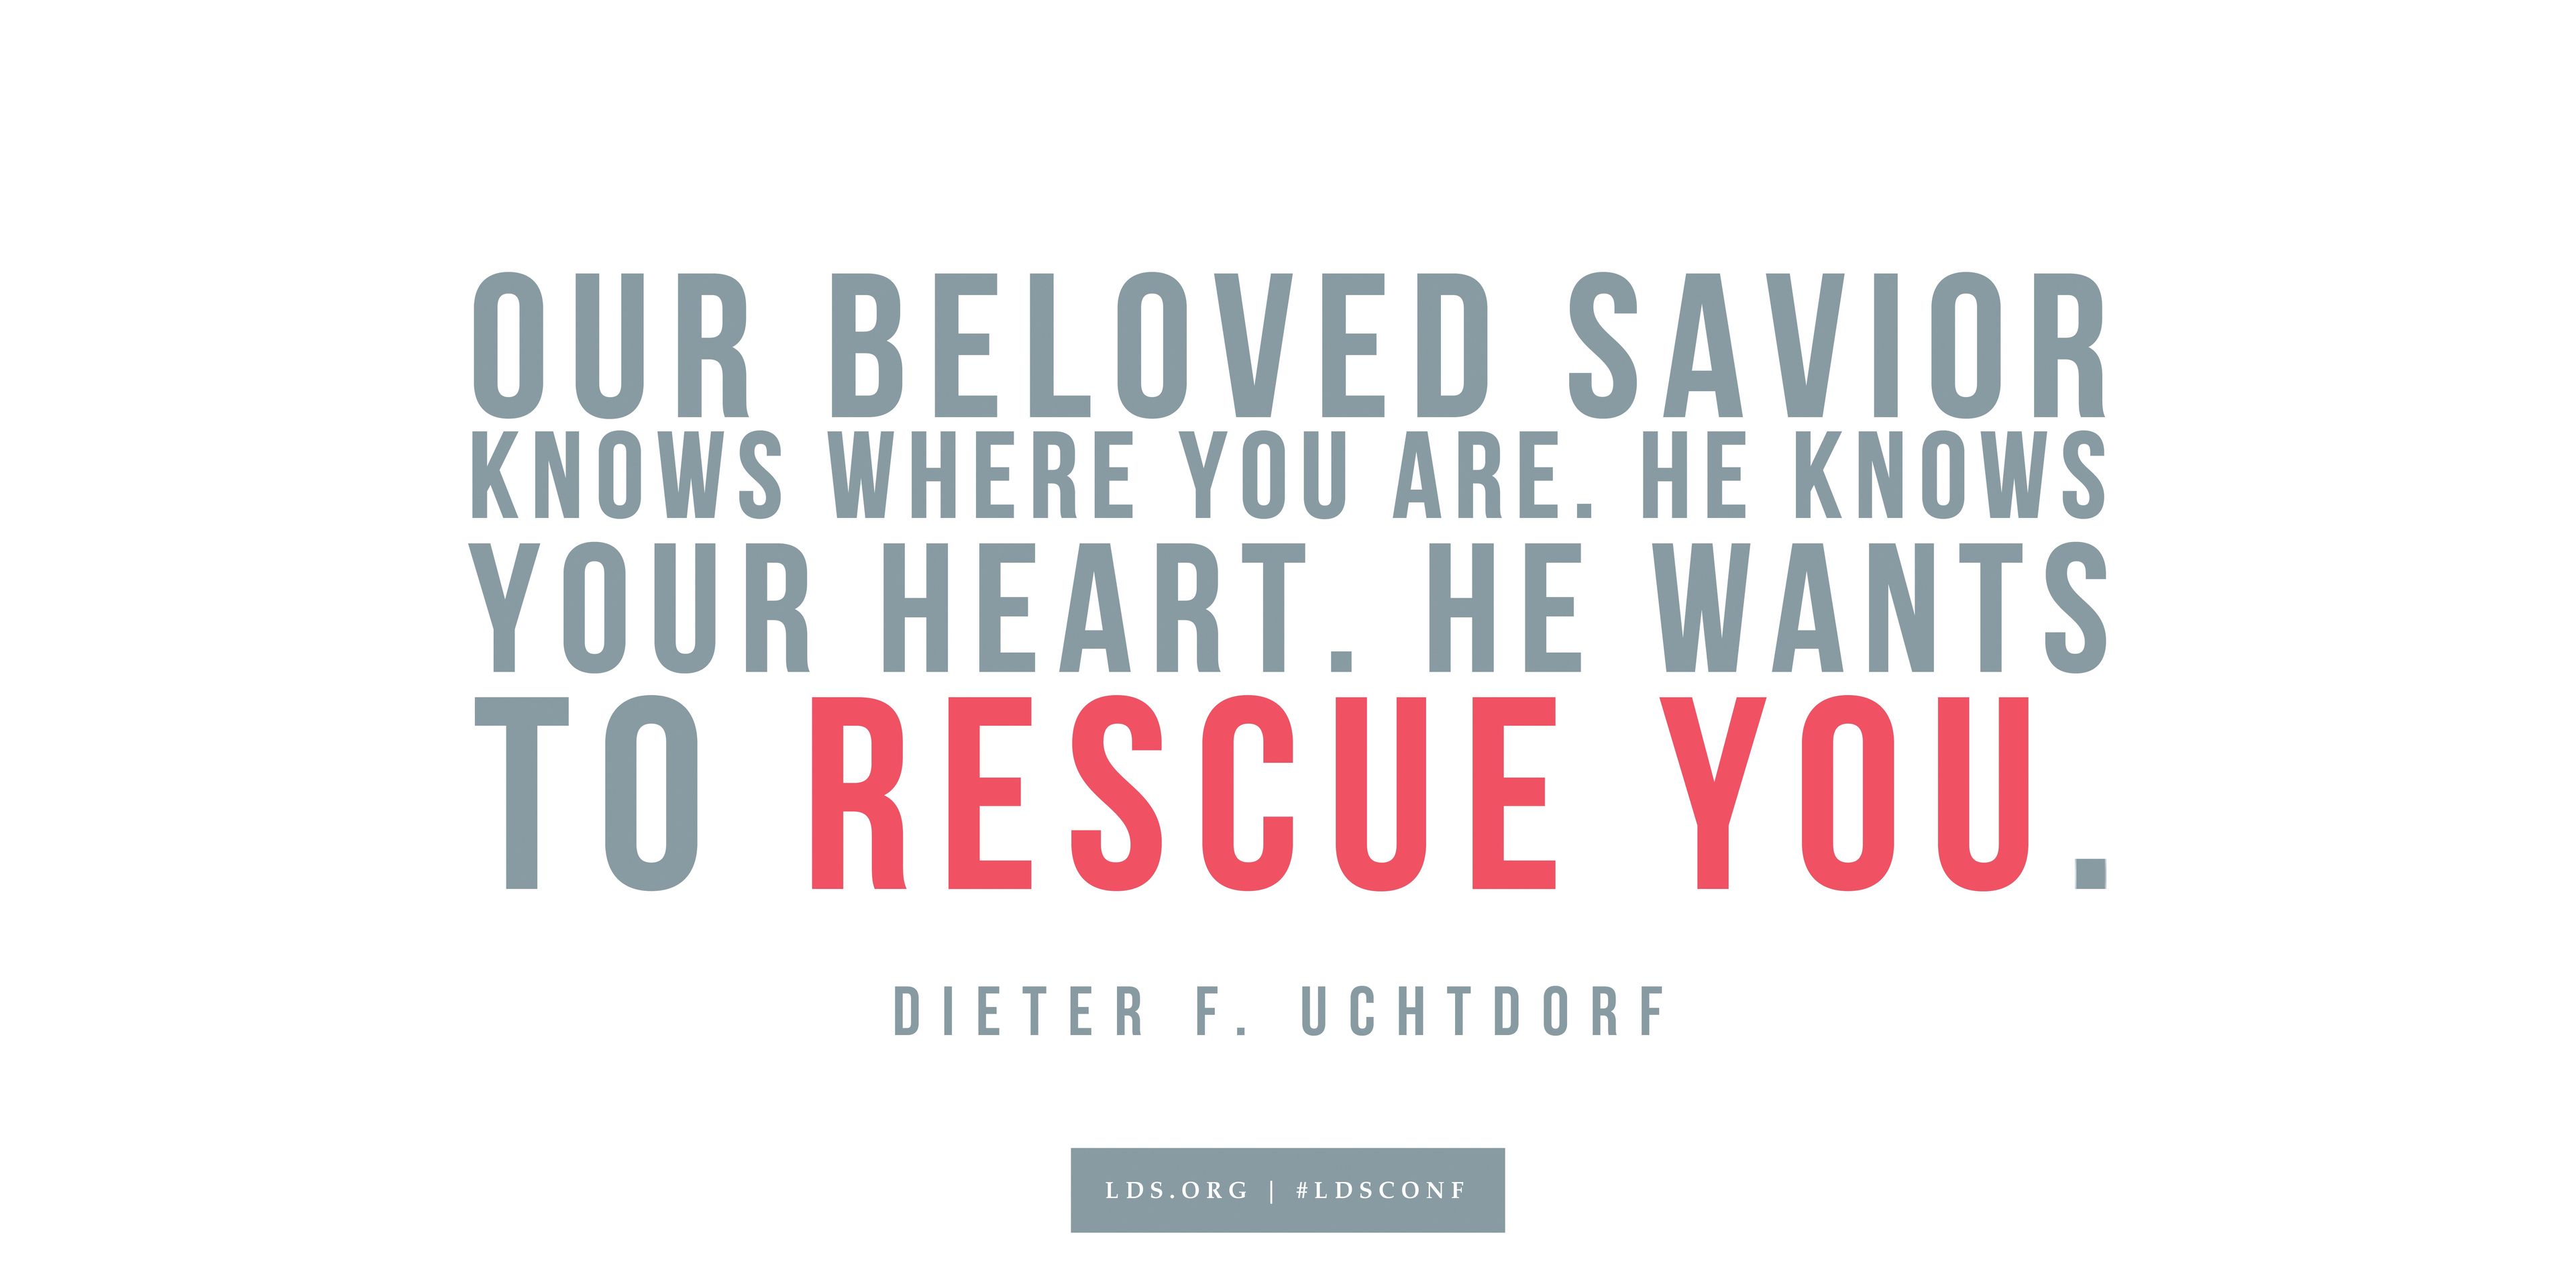 “Our beloved Savior knows where you are. He knows your heart. He wants to rescue you.”—Dieter F. Uchtdorf, “Learn from Alma and Amulek”